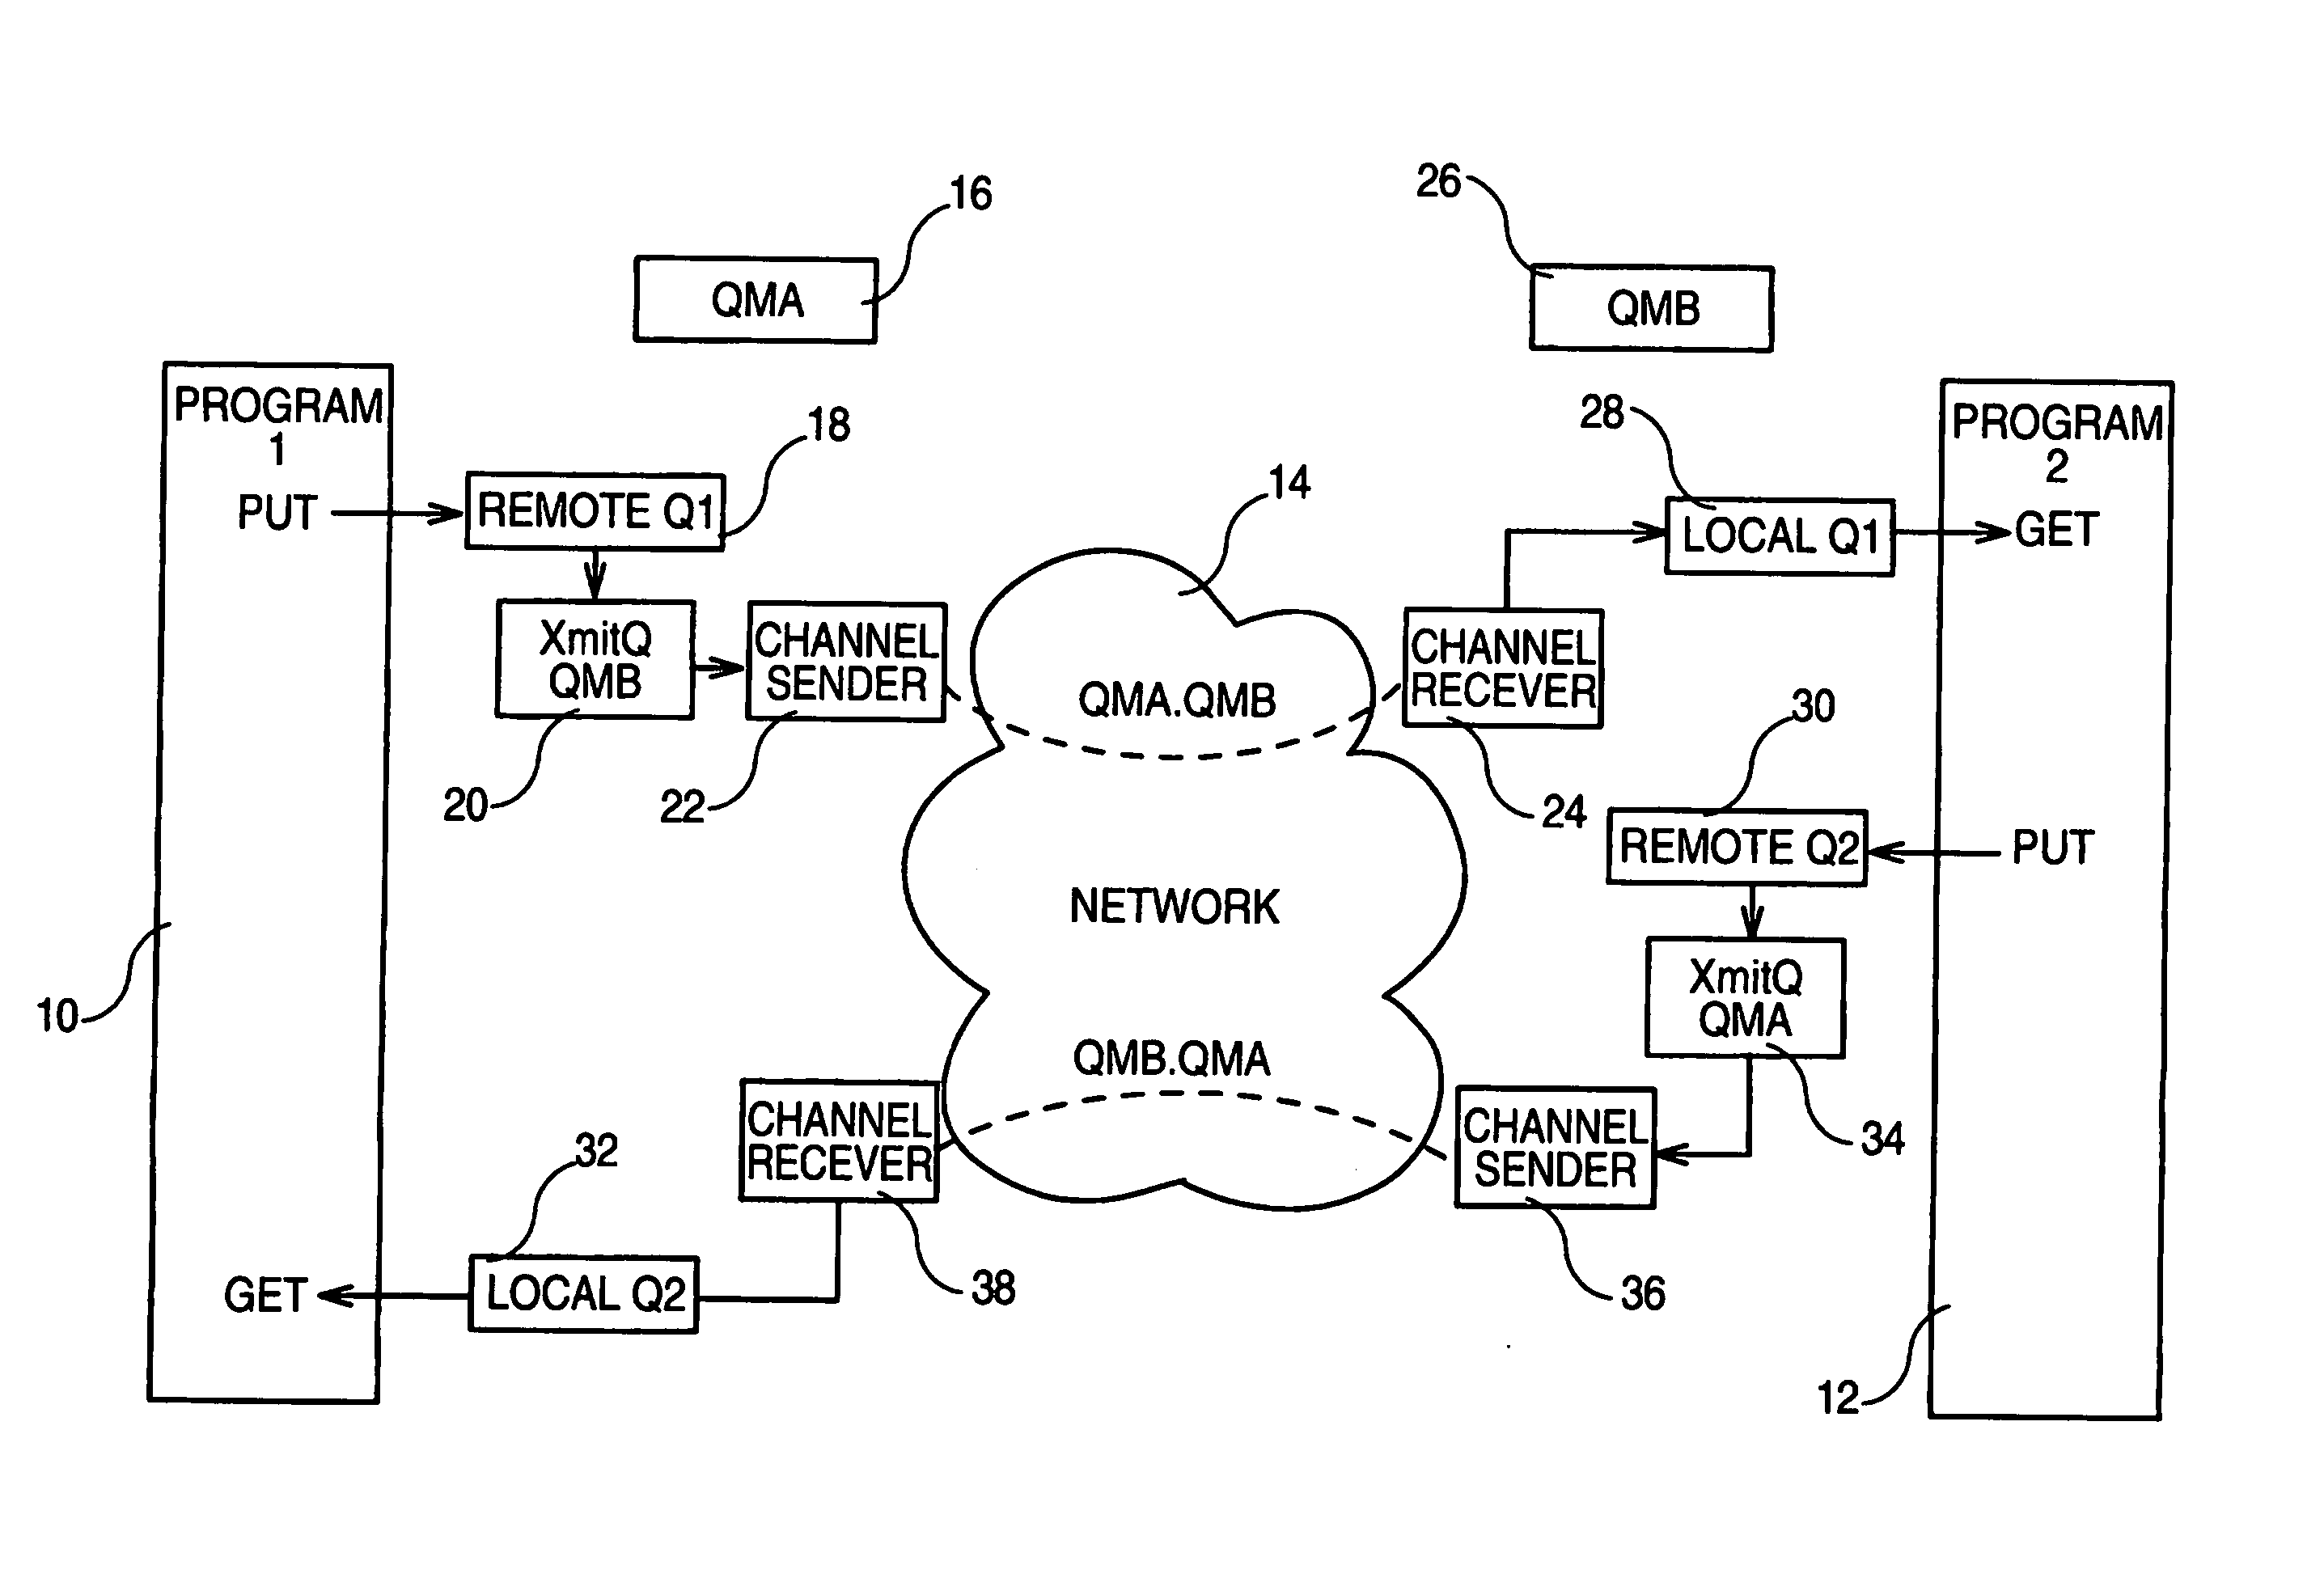 System for defining an alternate channel routing mechanism in a messaging middleware environment